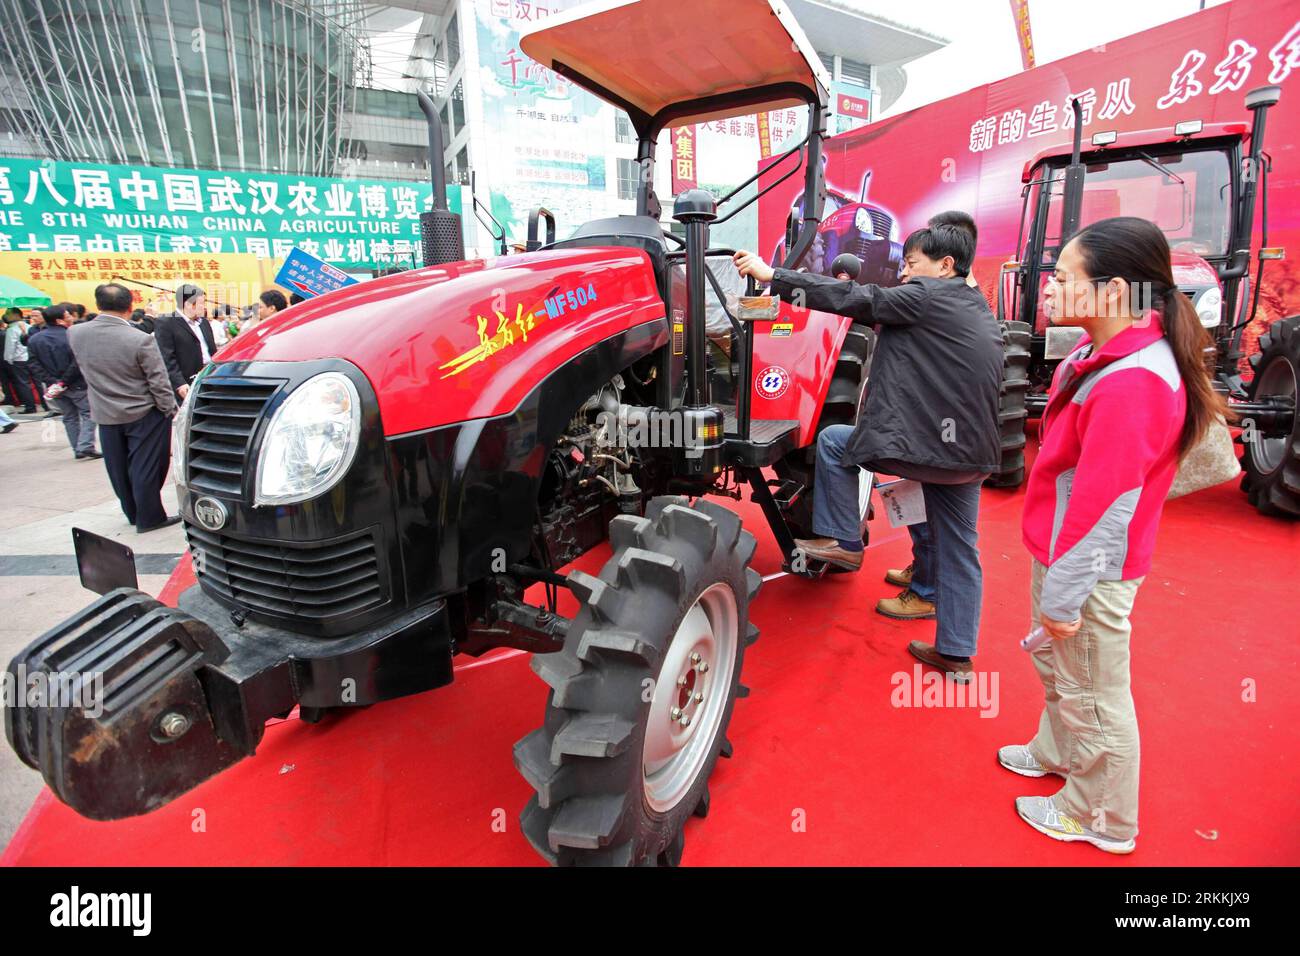 Bildnummer: 56250946  Datum: 05.11.2011  Copyright: imago/Xinhua (111105) -- WUHAN, Nov. 5, 2011 (Xinhua) -- Visitors look at the agricultural mechanical equipments during an agricultural fair in Wuhan, capital of central China s Hubei Province, Nov. 5, 2011. More than 17,000 agricultural produces from 2,300 exhibitors around the world took part in the fair starting on Saturday. (Xinhua/Wang Zhenwu) (ry) CHINA-WUHAN-AGRICULTURE-FAIR (CN) PUBLICATIONxNOTxINxCHN Wirtschaft Messe Landwirtschaft Landwirtschaftsmesse xbs x0x 2011 quer      56250946 Date 05 11 2011 Copyright Imago XINHUA  Wuhan Nov Stock Photo